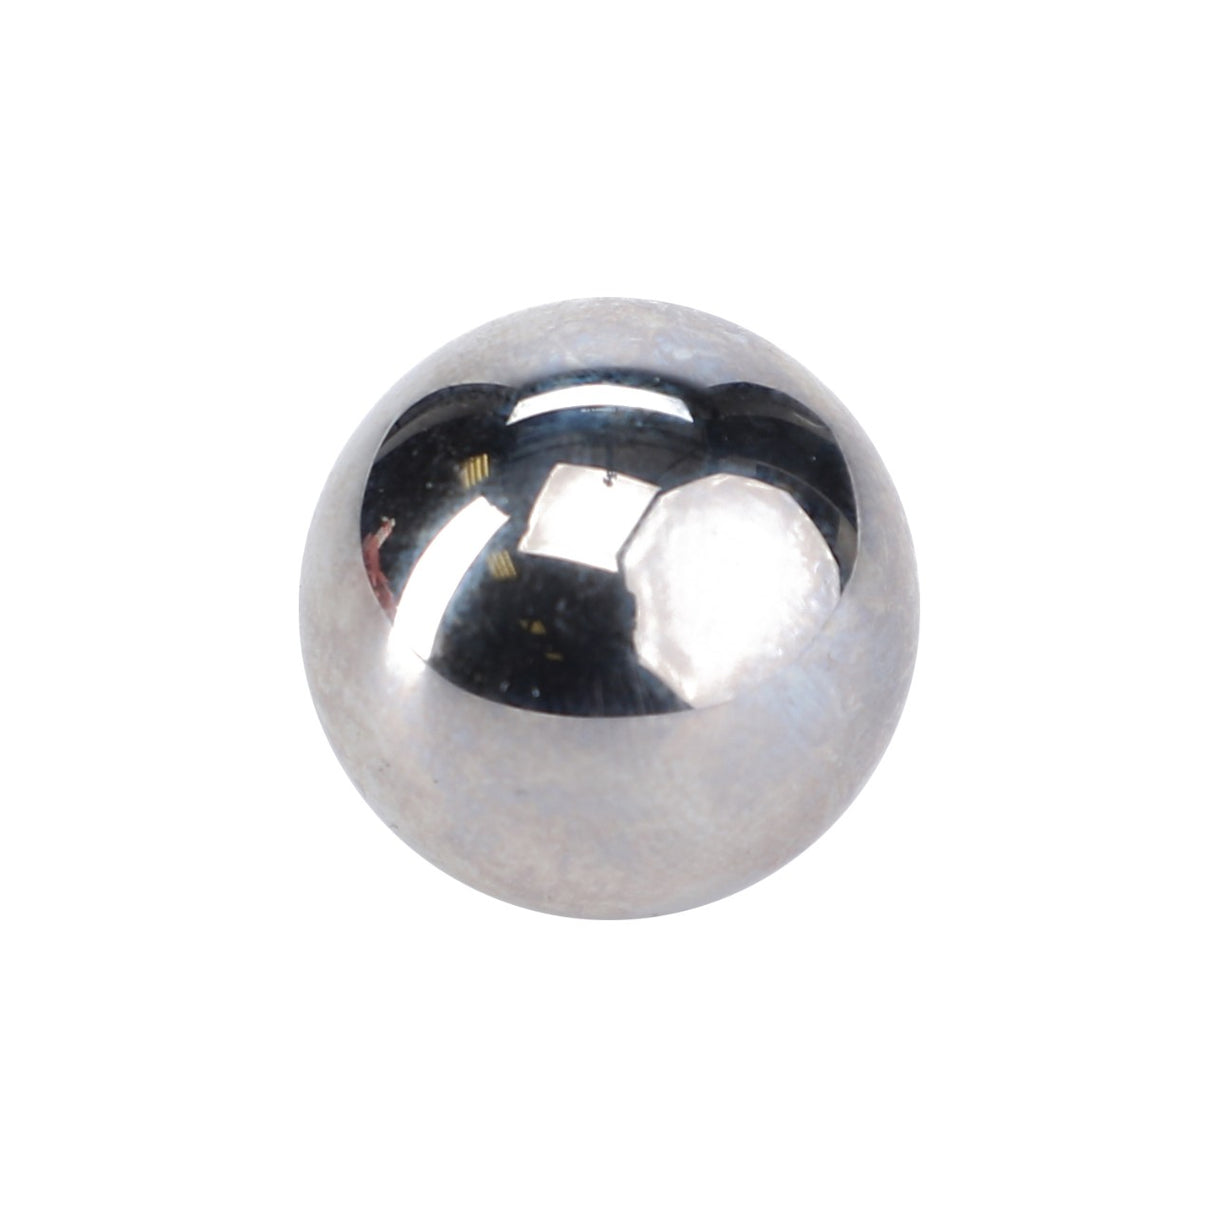 *STOCK CLEARANCE* - Ball - 21704005 - Farming Parts